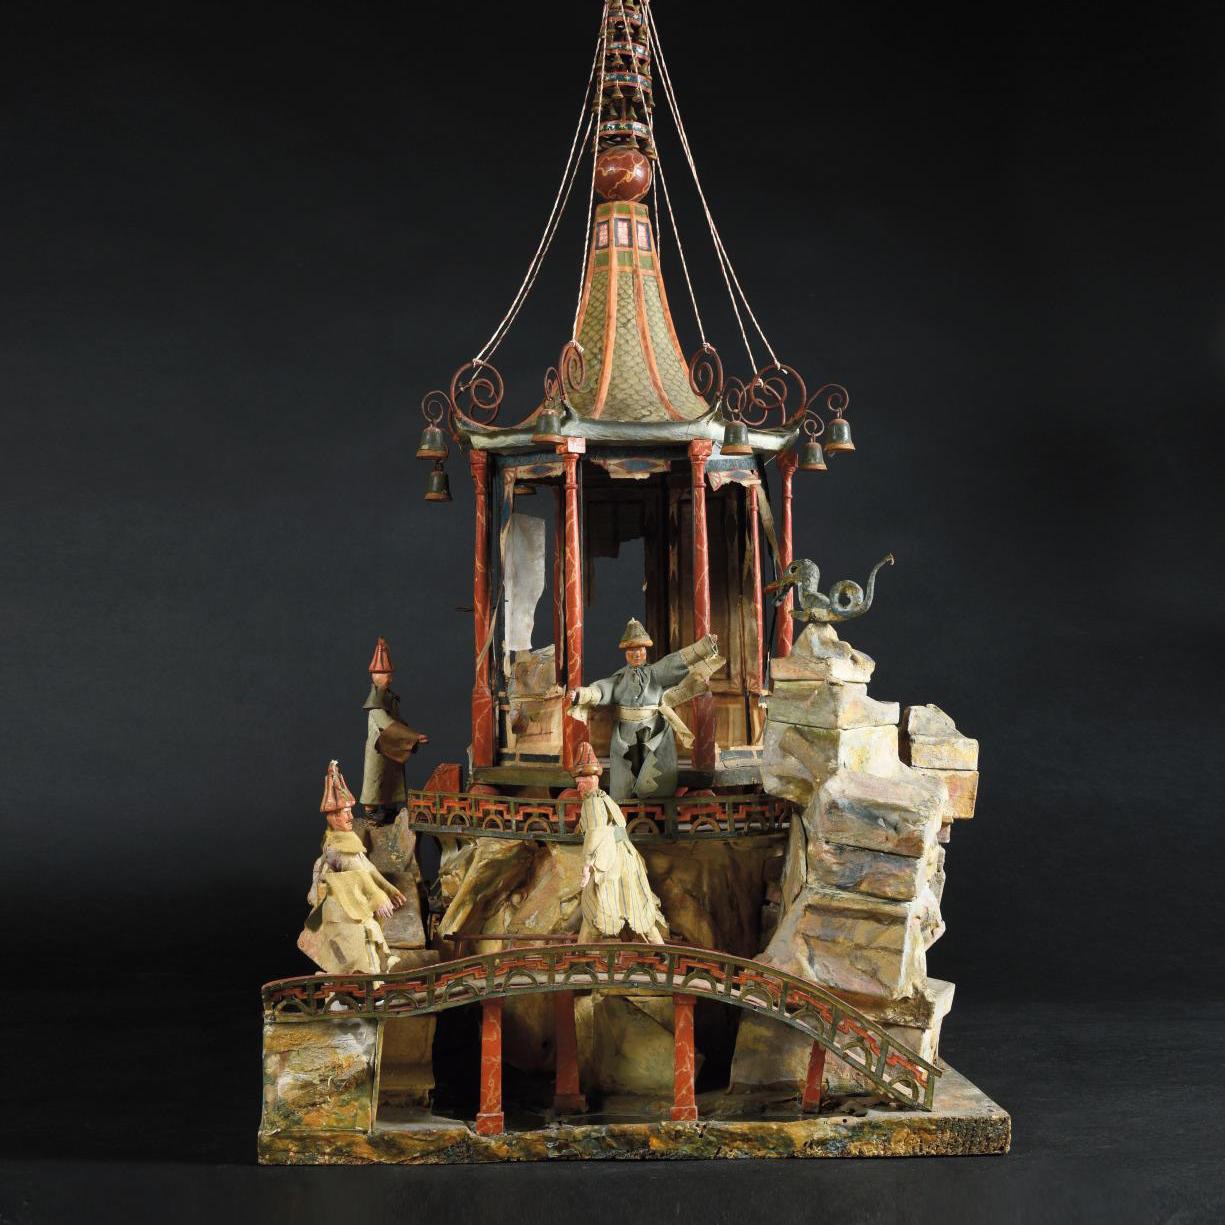 A Spectacular Folly in the Form of a Chinese Pagoda